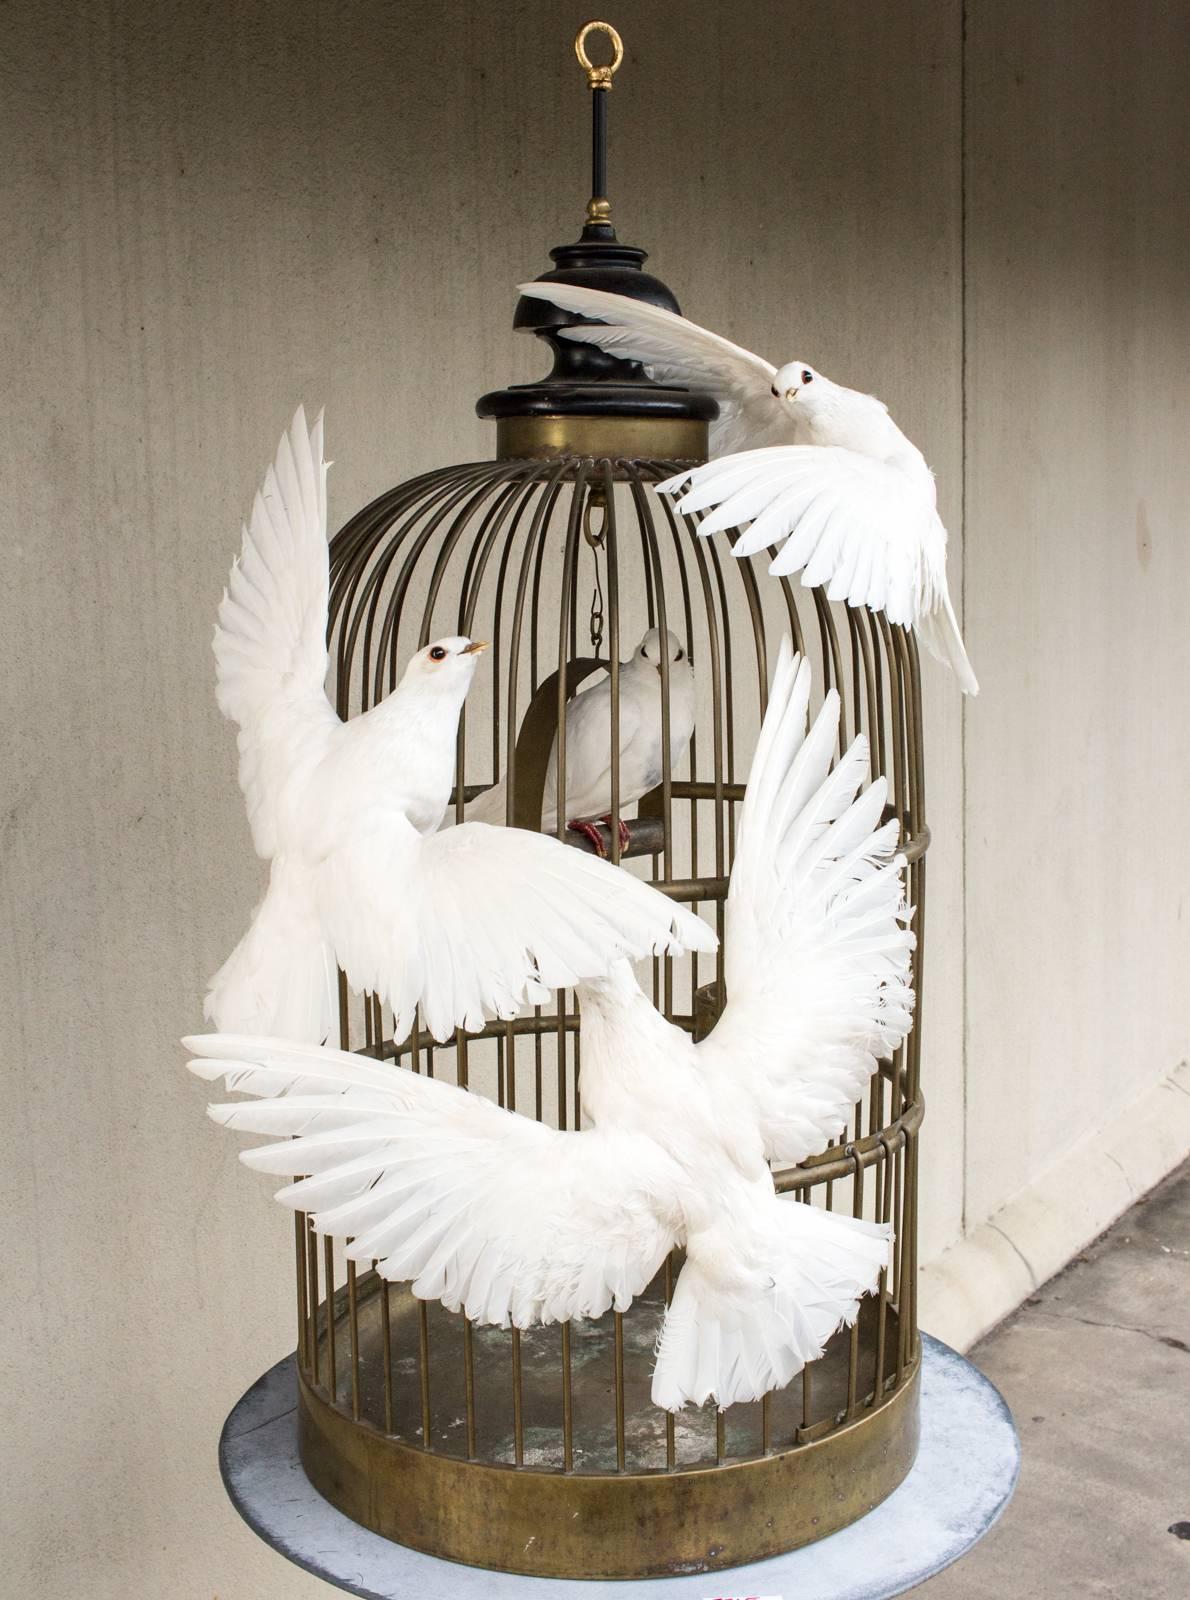 This unique and whimsical birdcage and taxidermy dove sculpture was recently uncovered in Paris and was originally crafted in Biarritz.  The brass birdcage is antique with quite a beautiful patina and features a taxidermy dove perched on the